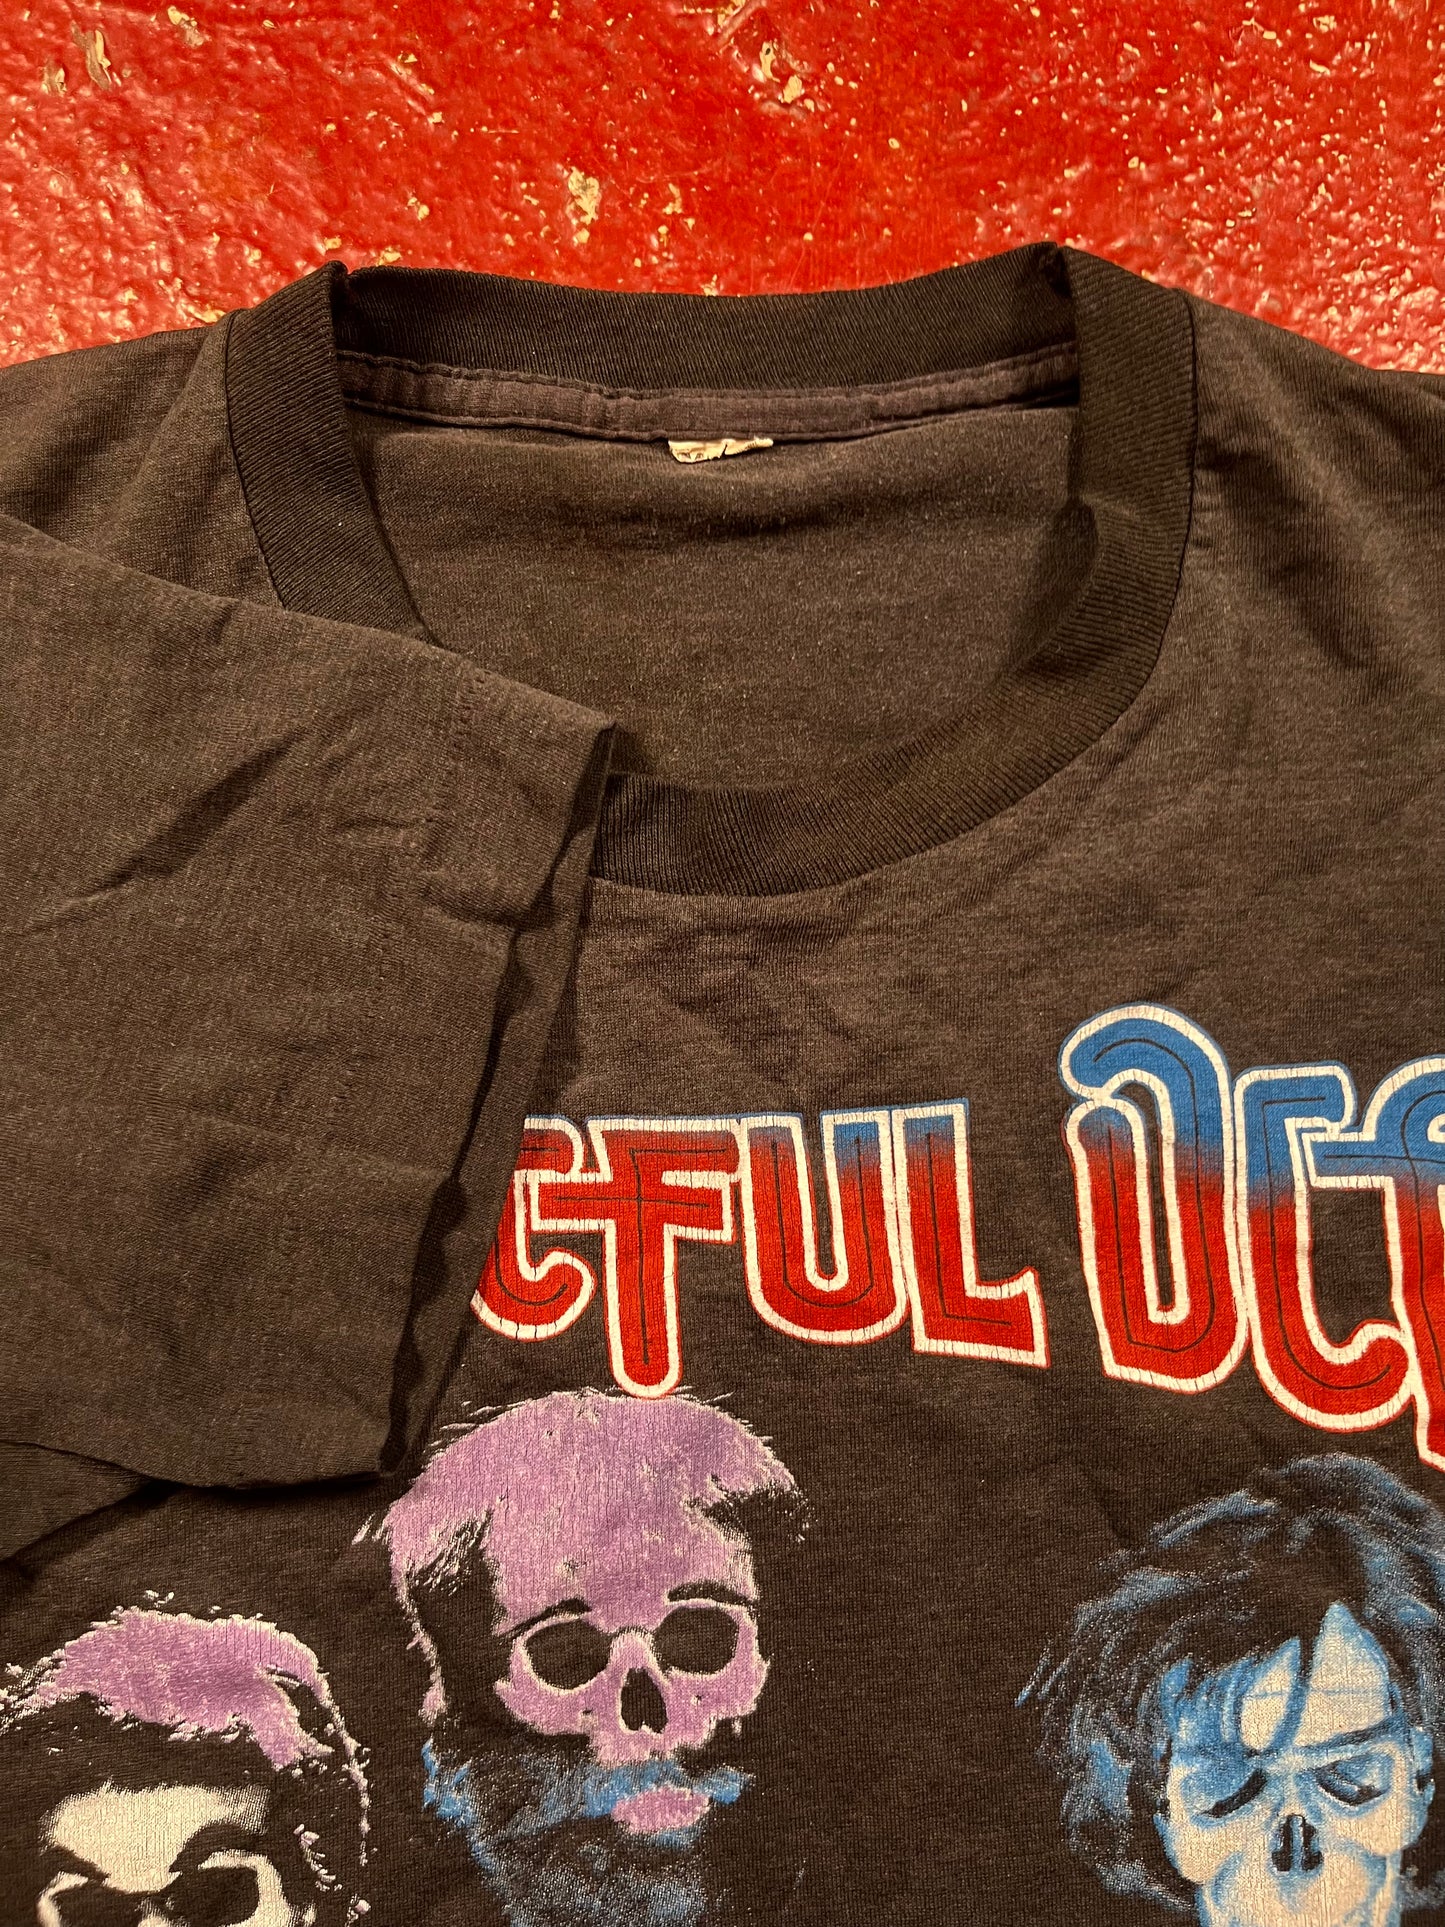 1987 Grateful Dead “Touch Of Grey” Tee